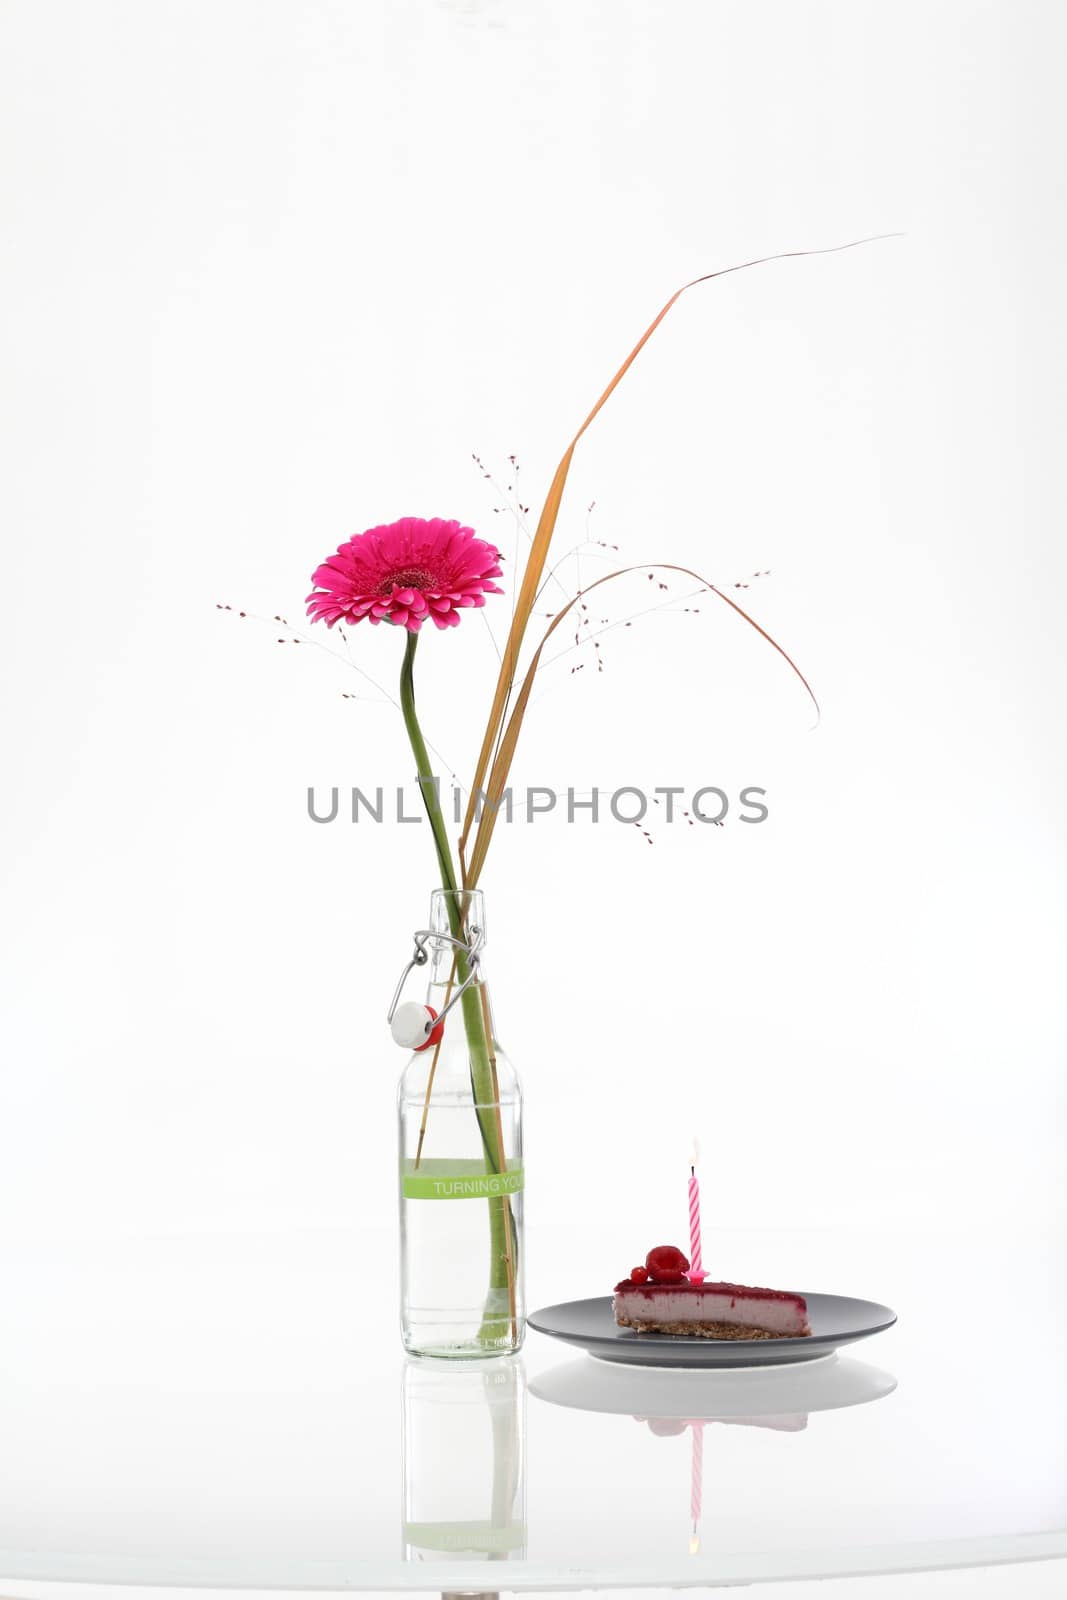 Flower with cheese cake